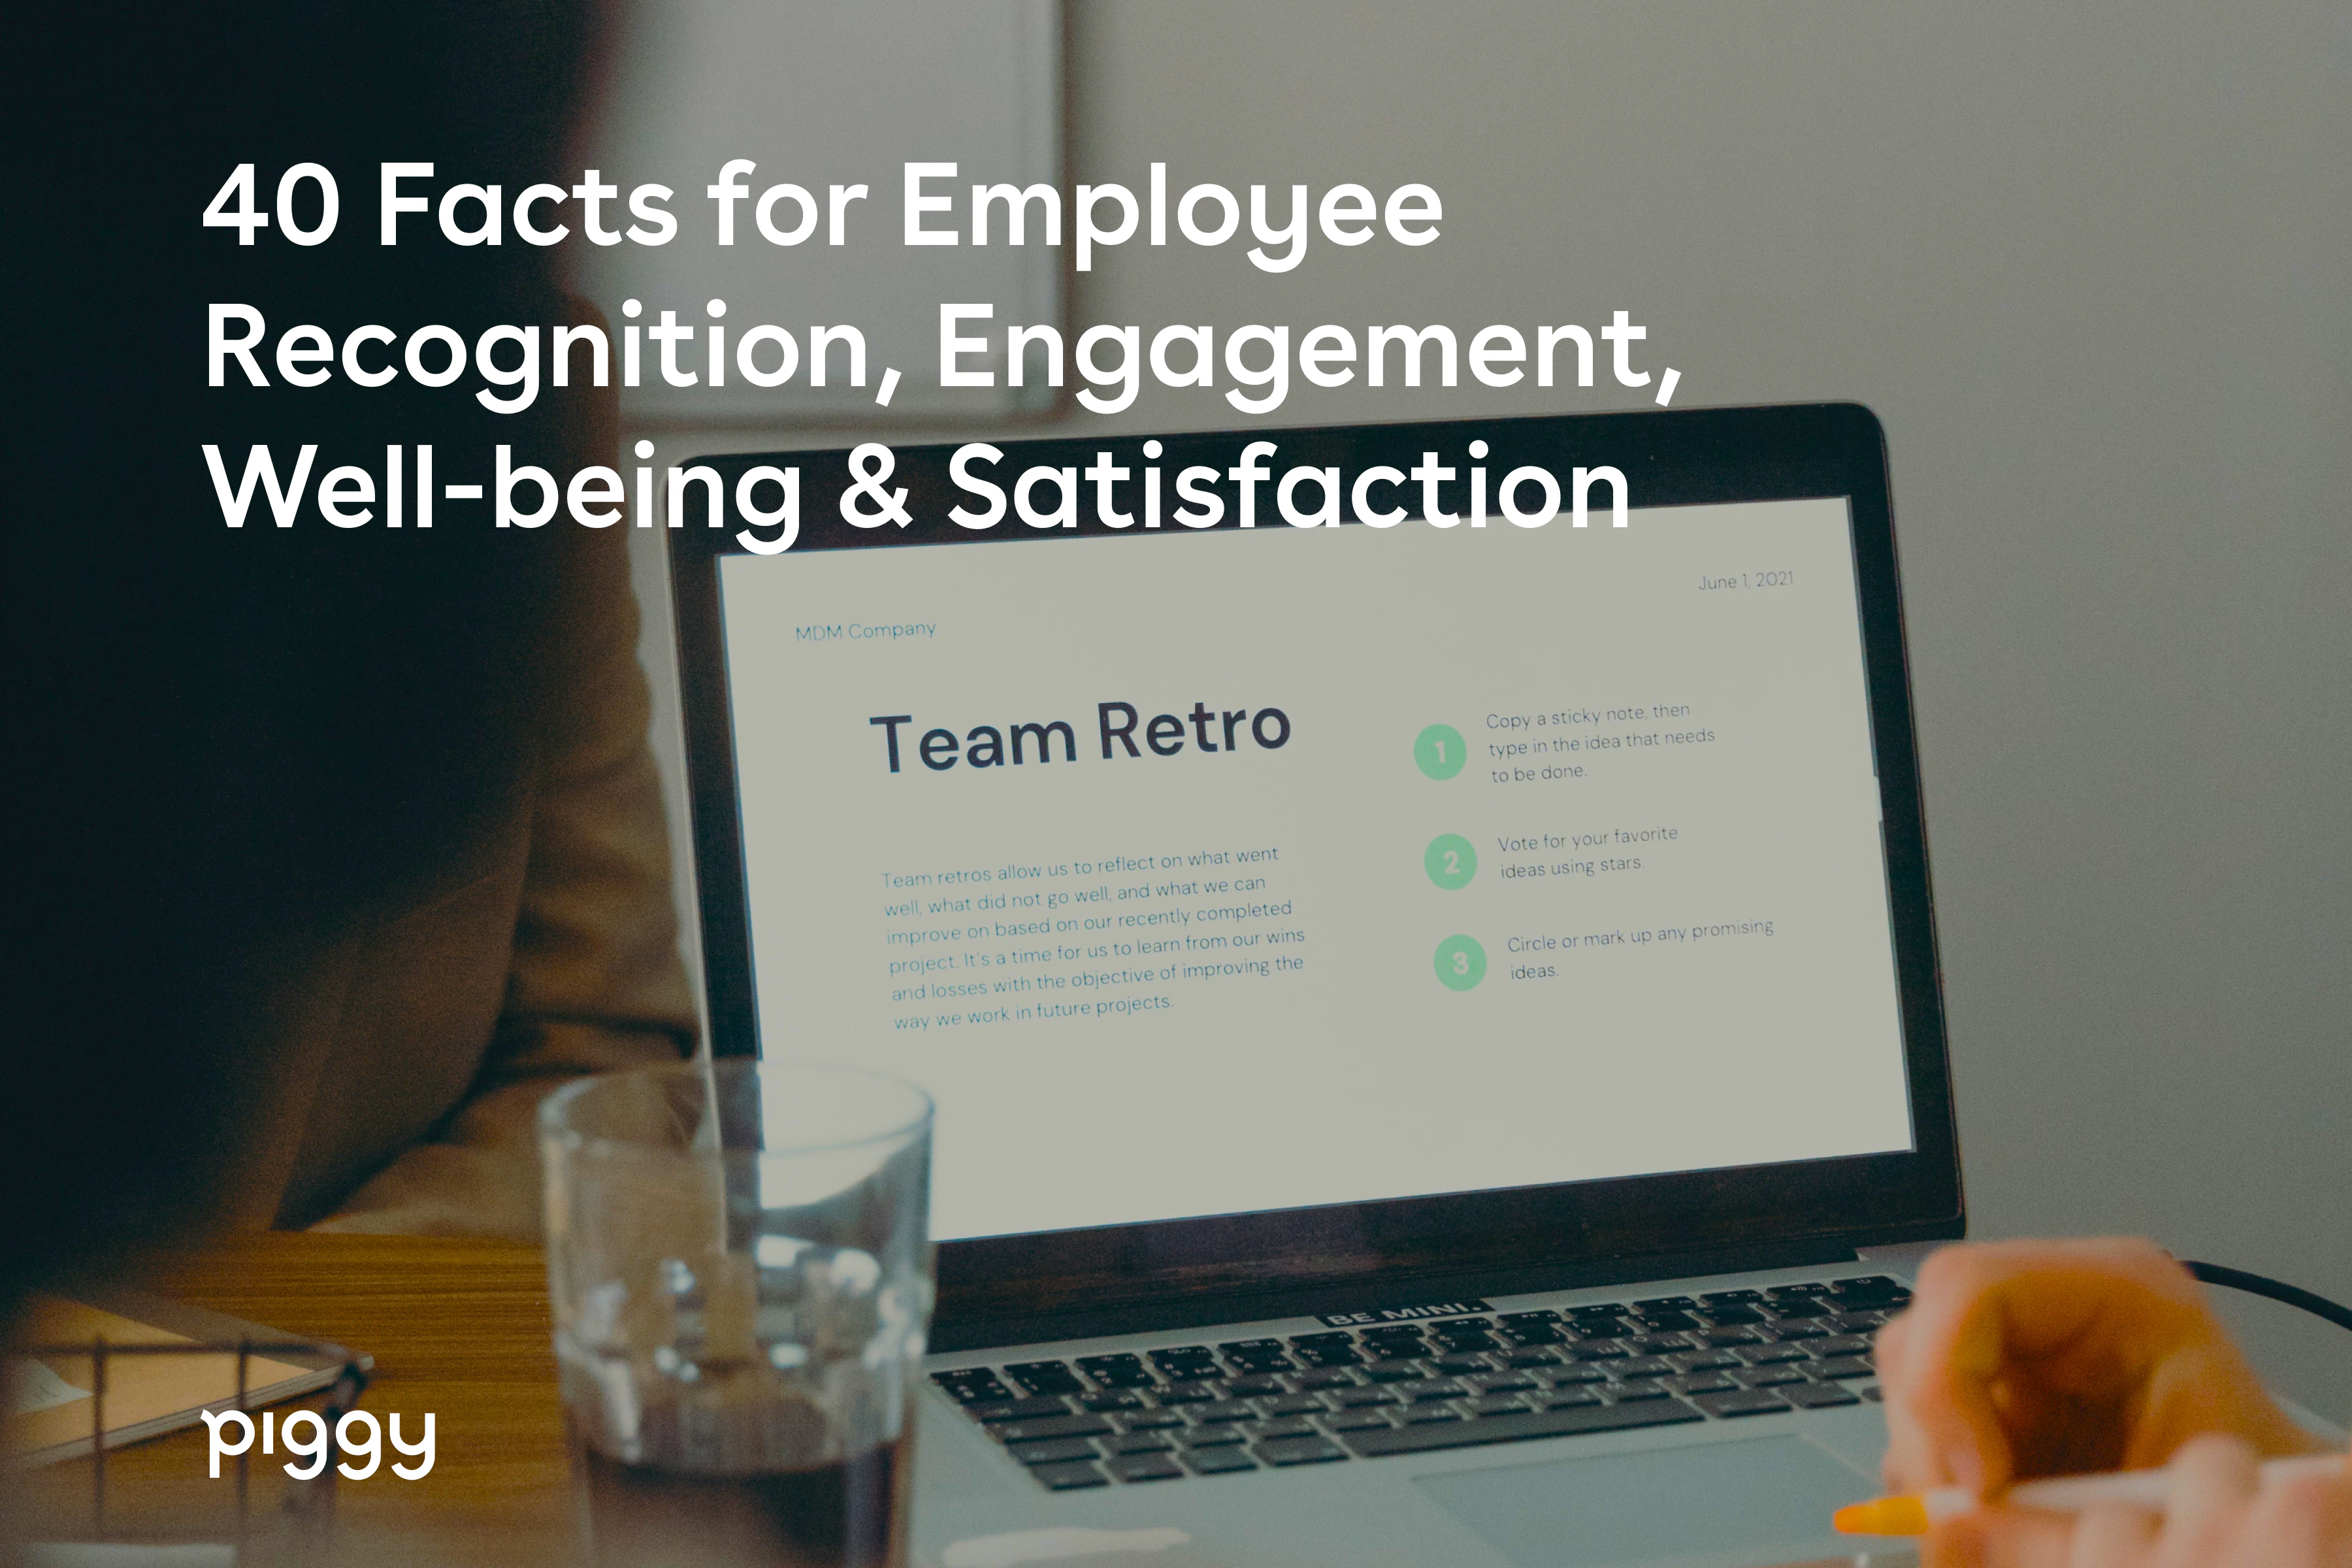 employee-loyalty-recognition-engagement-facts